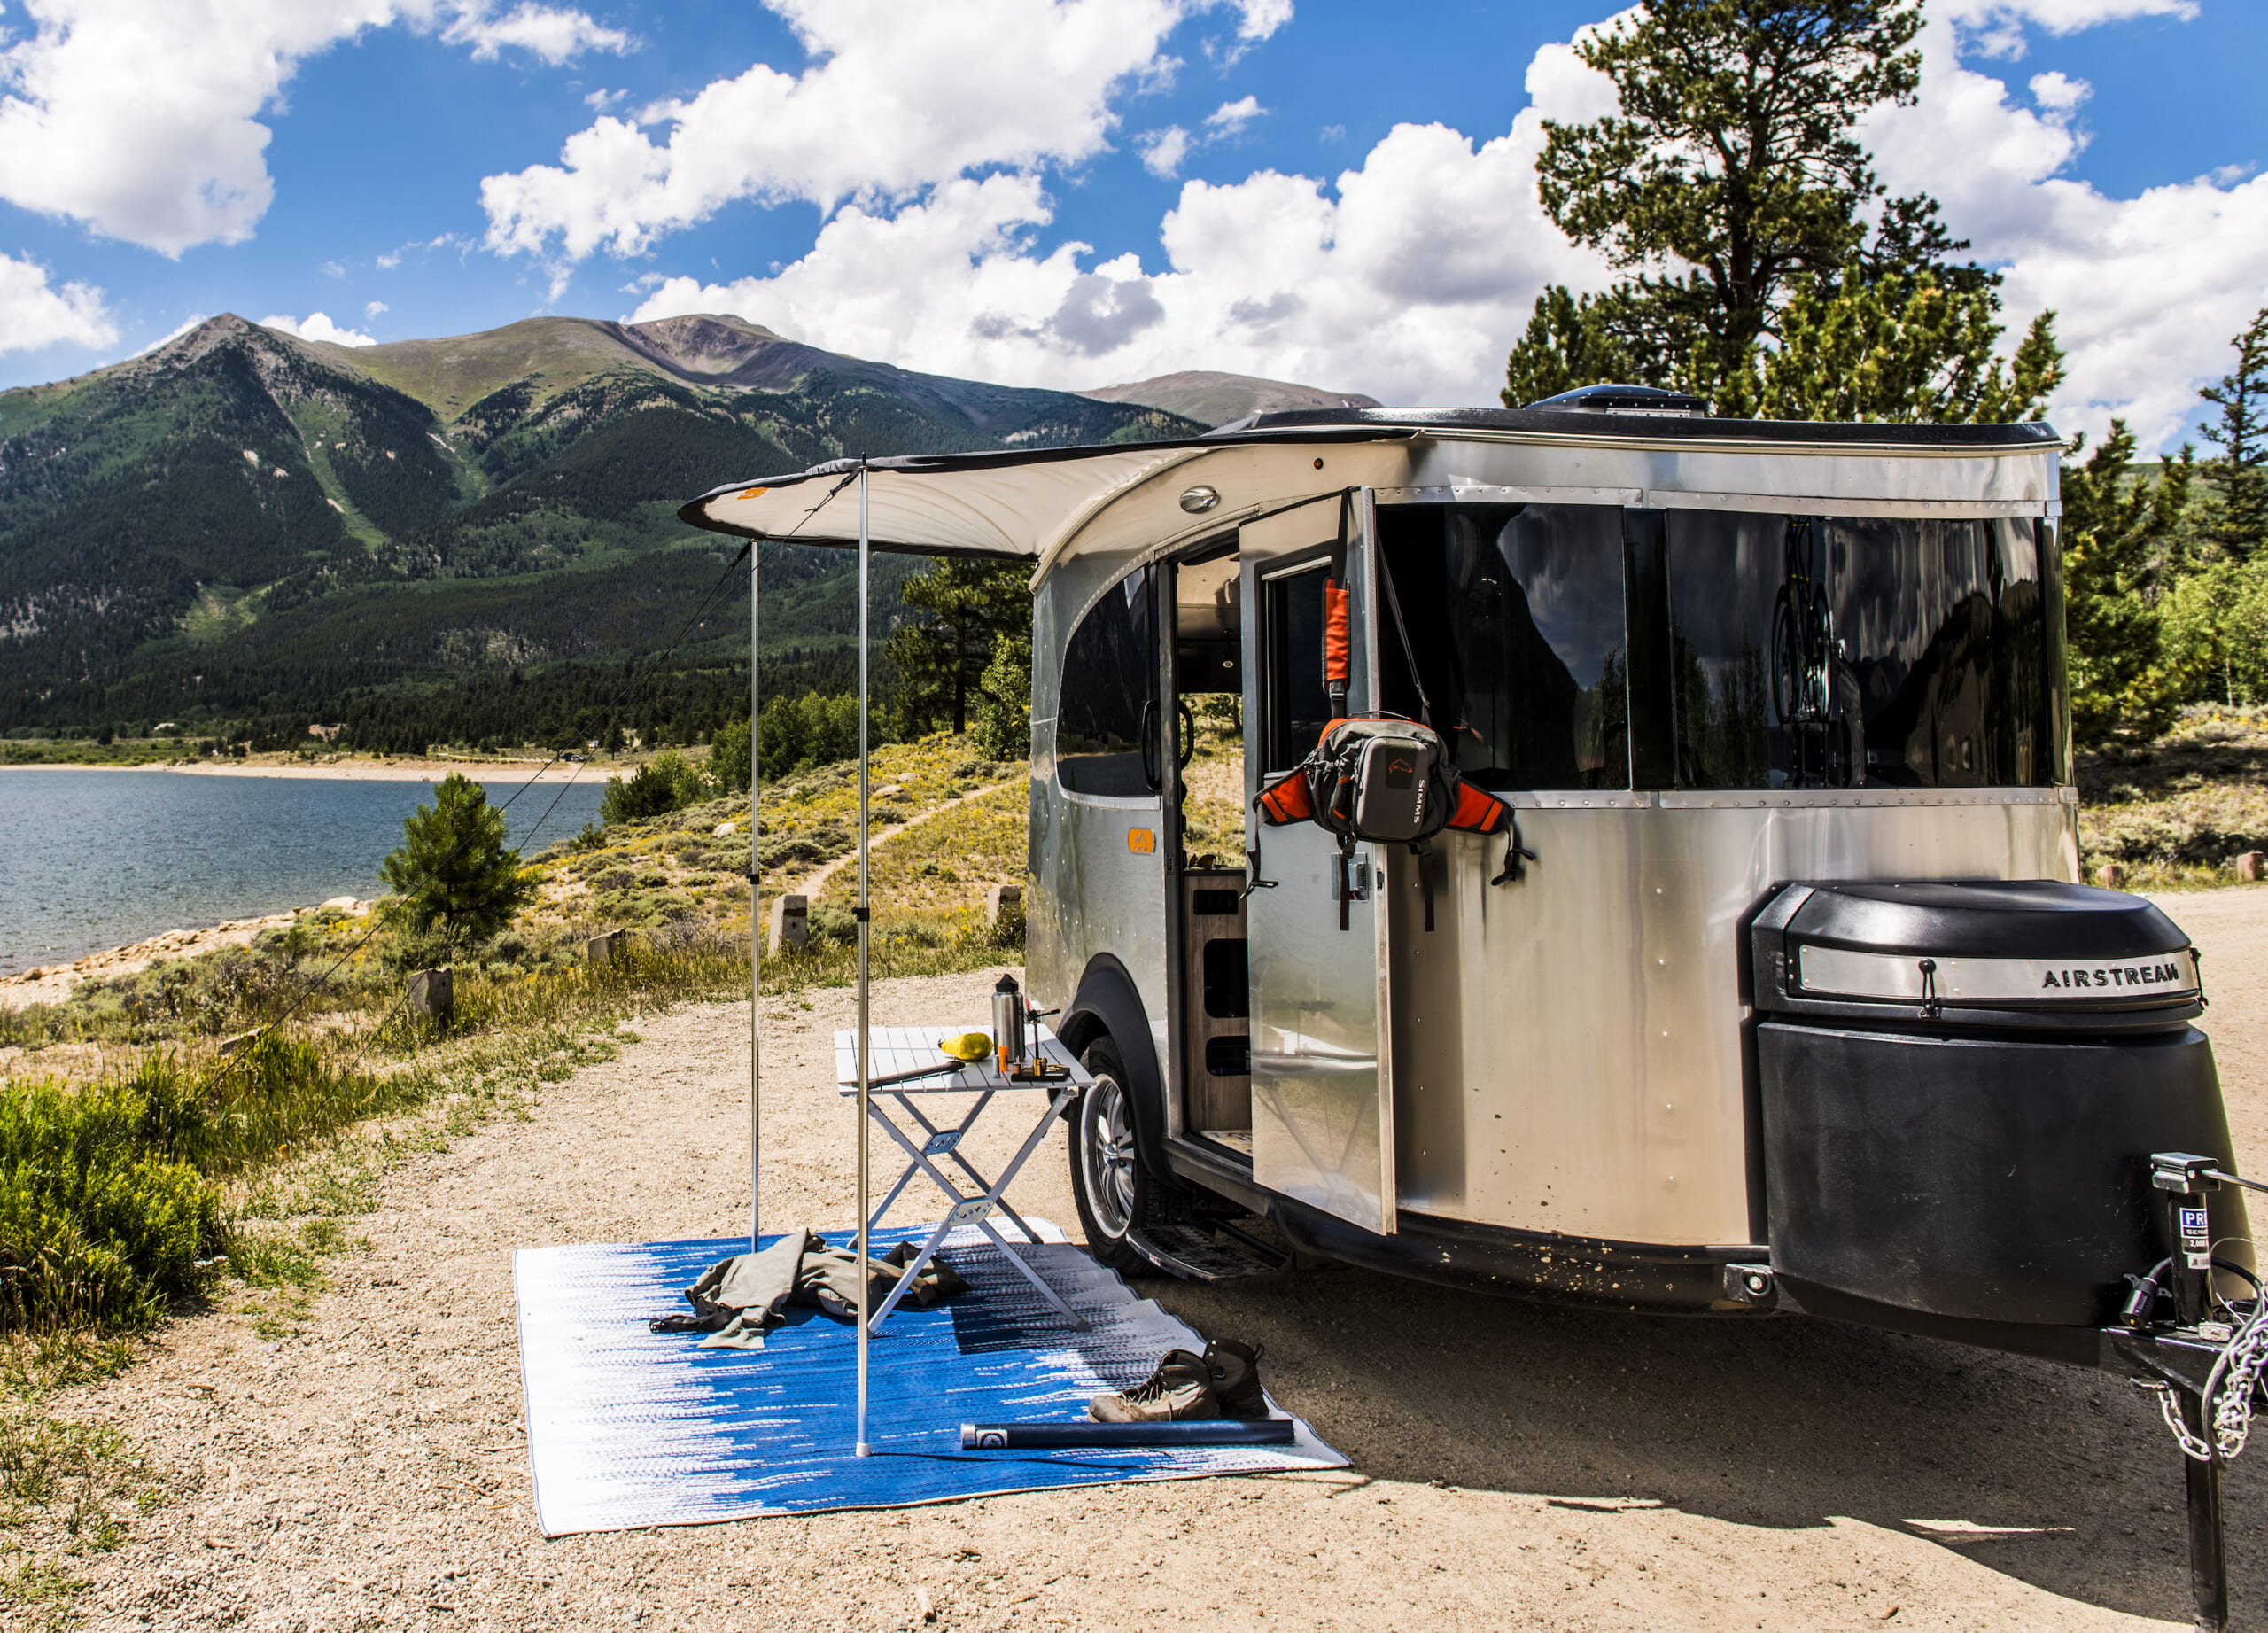 The Airstream BaseCamp is the Tiny Luxury Trailer You Never Knew You Wanted  - Maxim